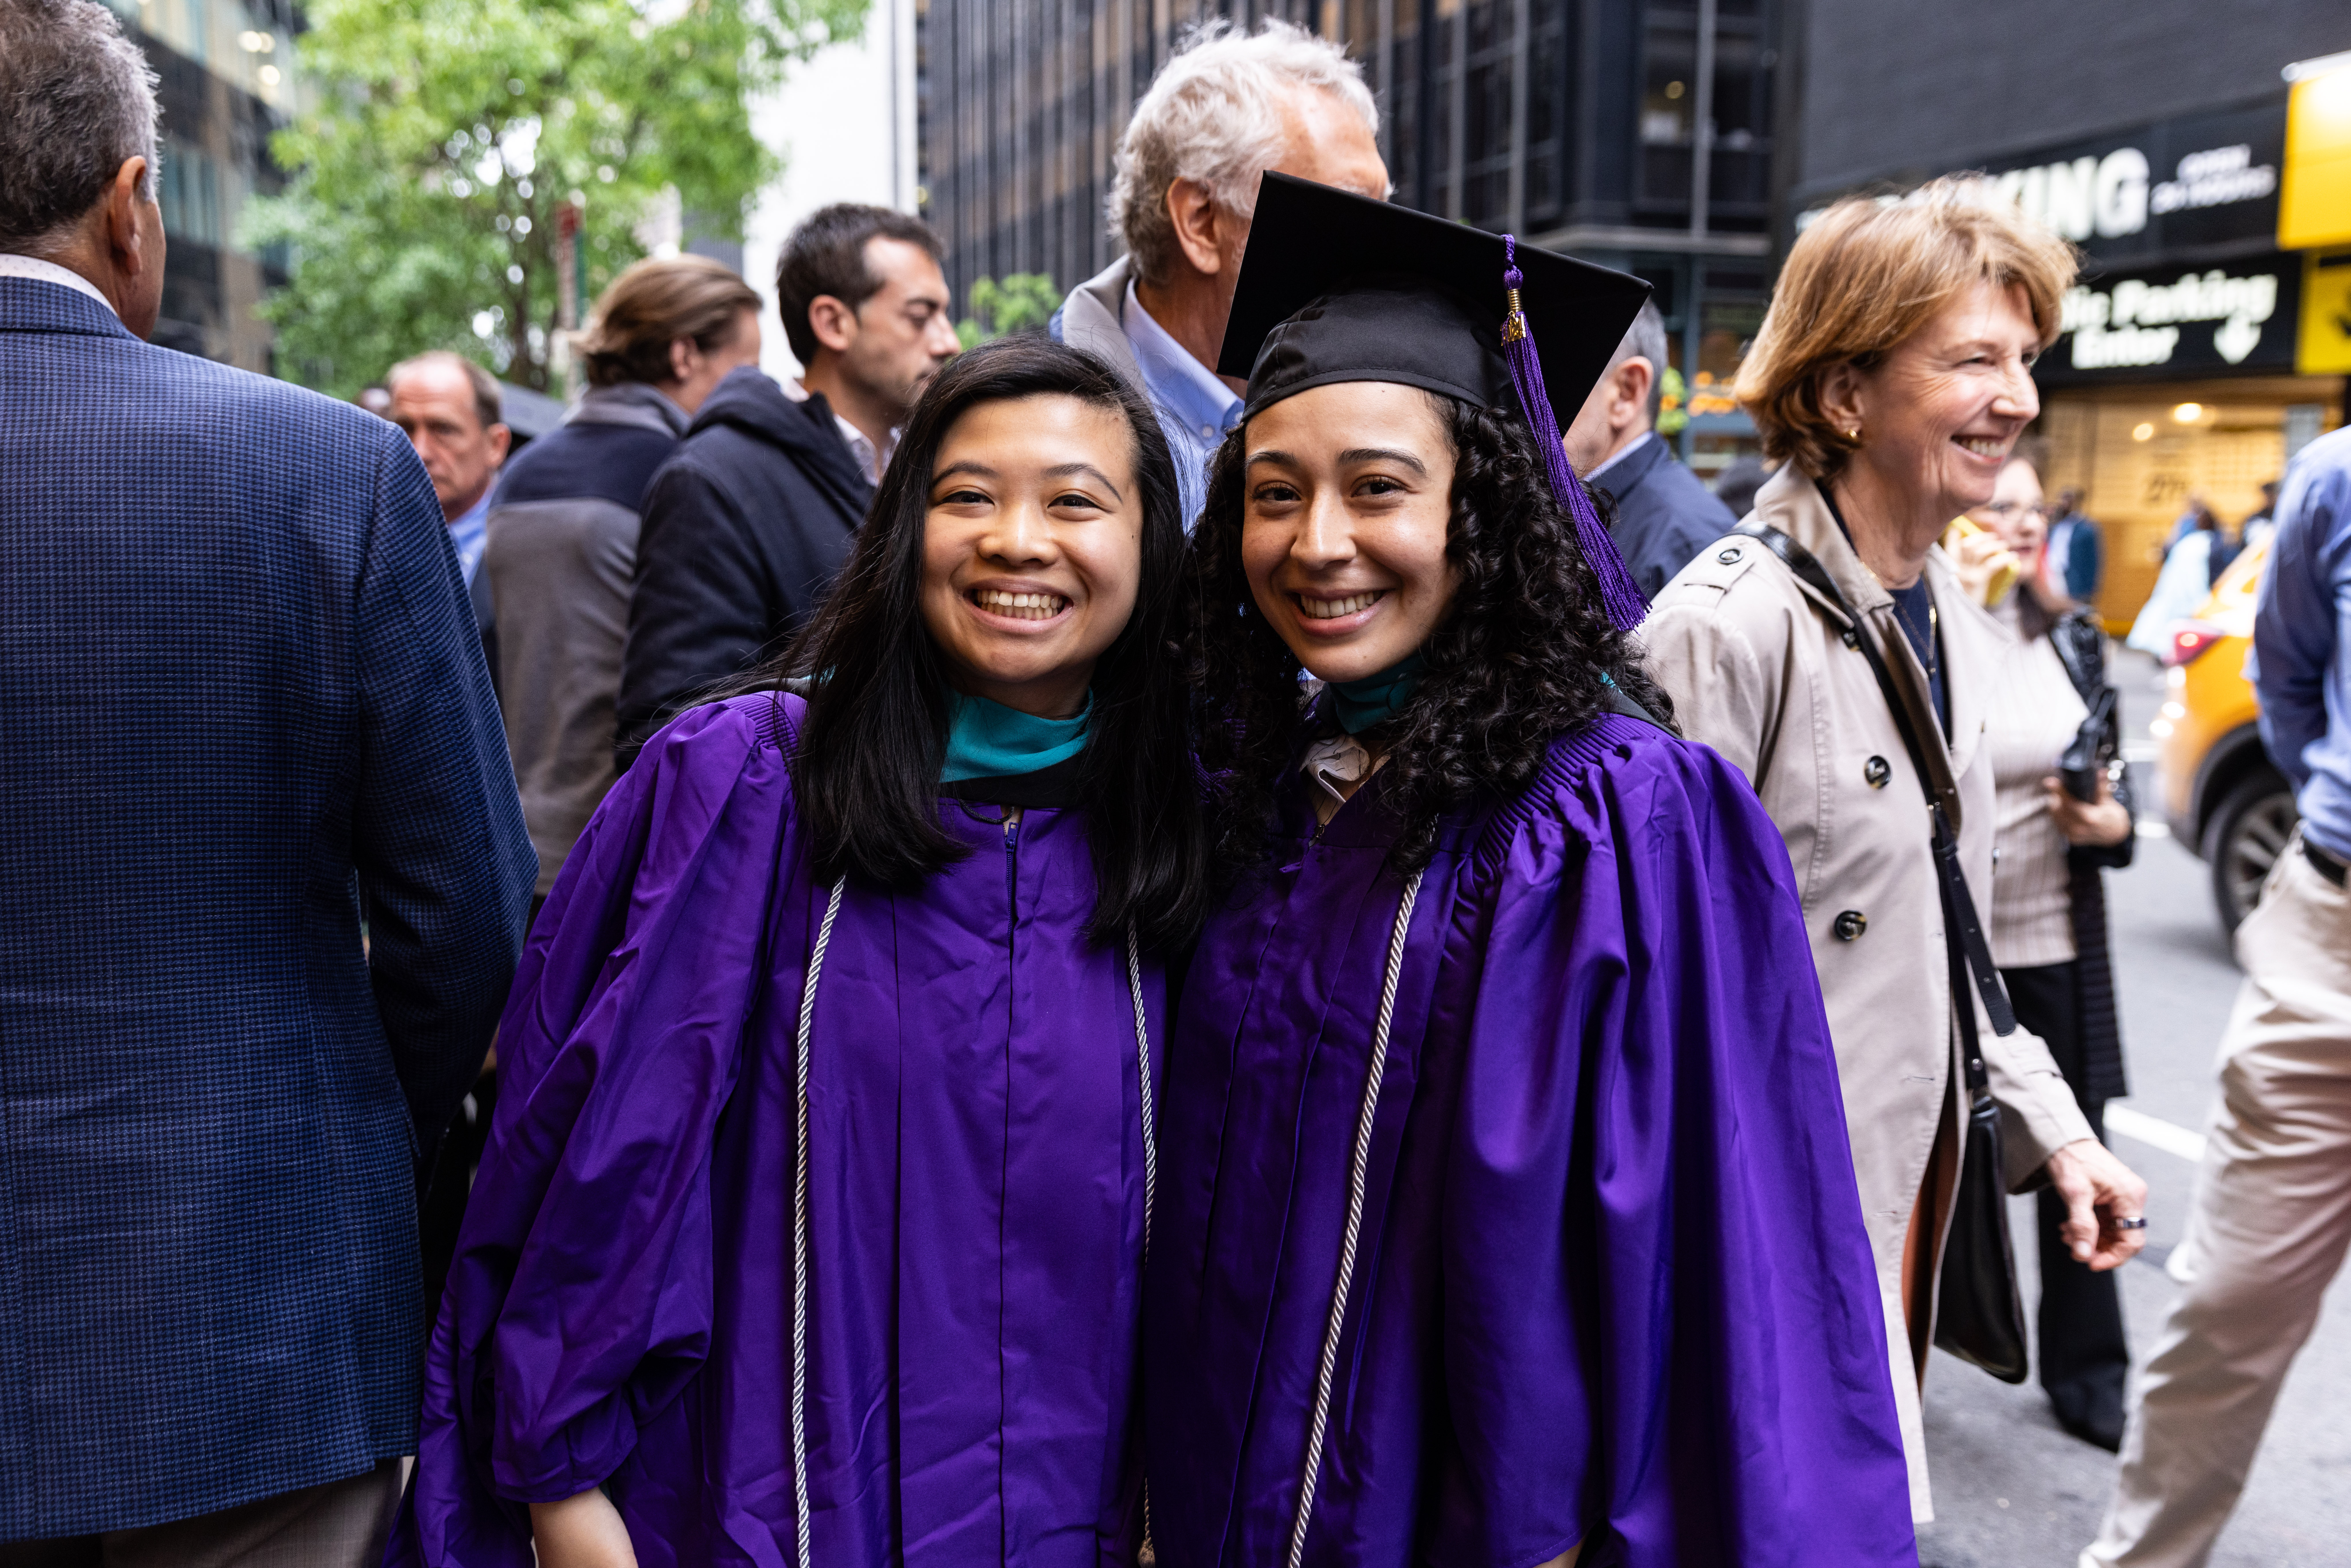 two students in purple graduation regalia standing in street smiling for camera